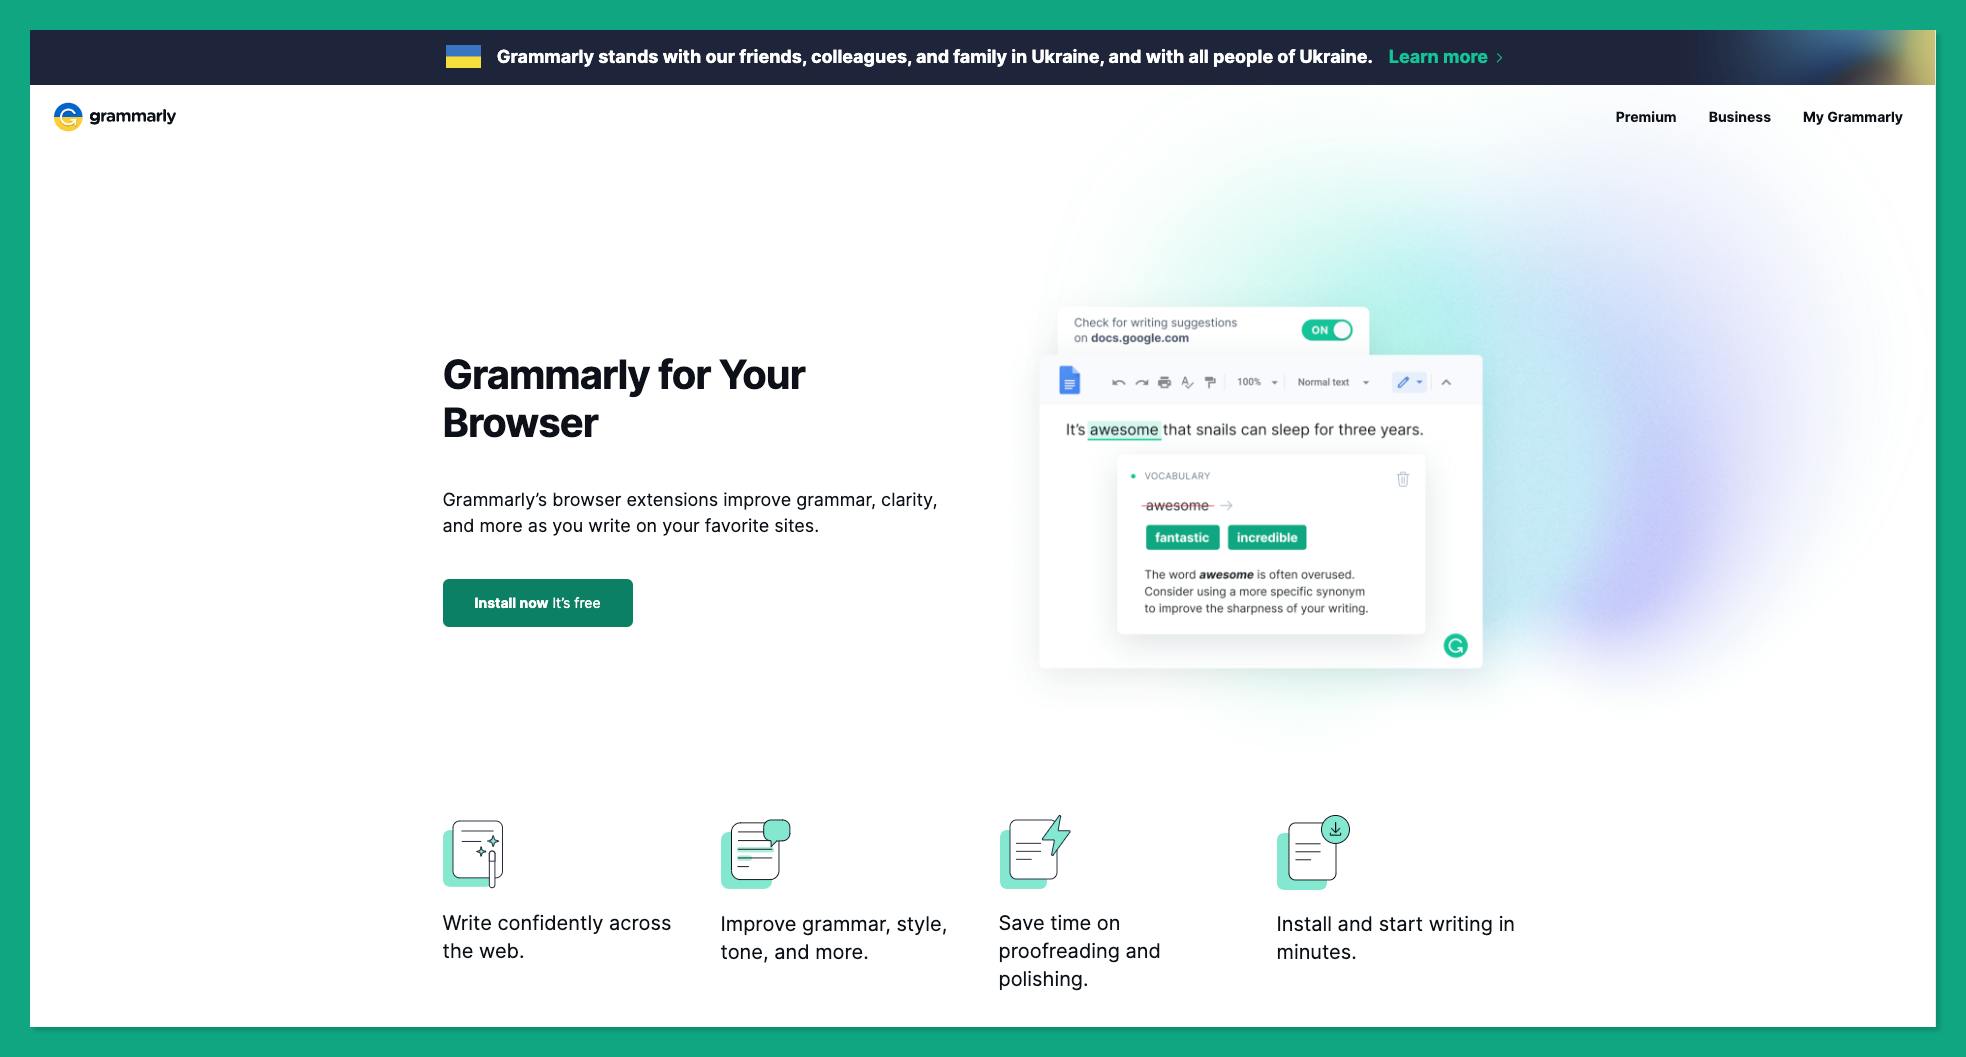 Grammarly’s browser extensions improve grammar, clarity, and more as you write on your favorite sites.